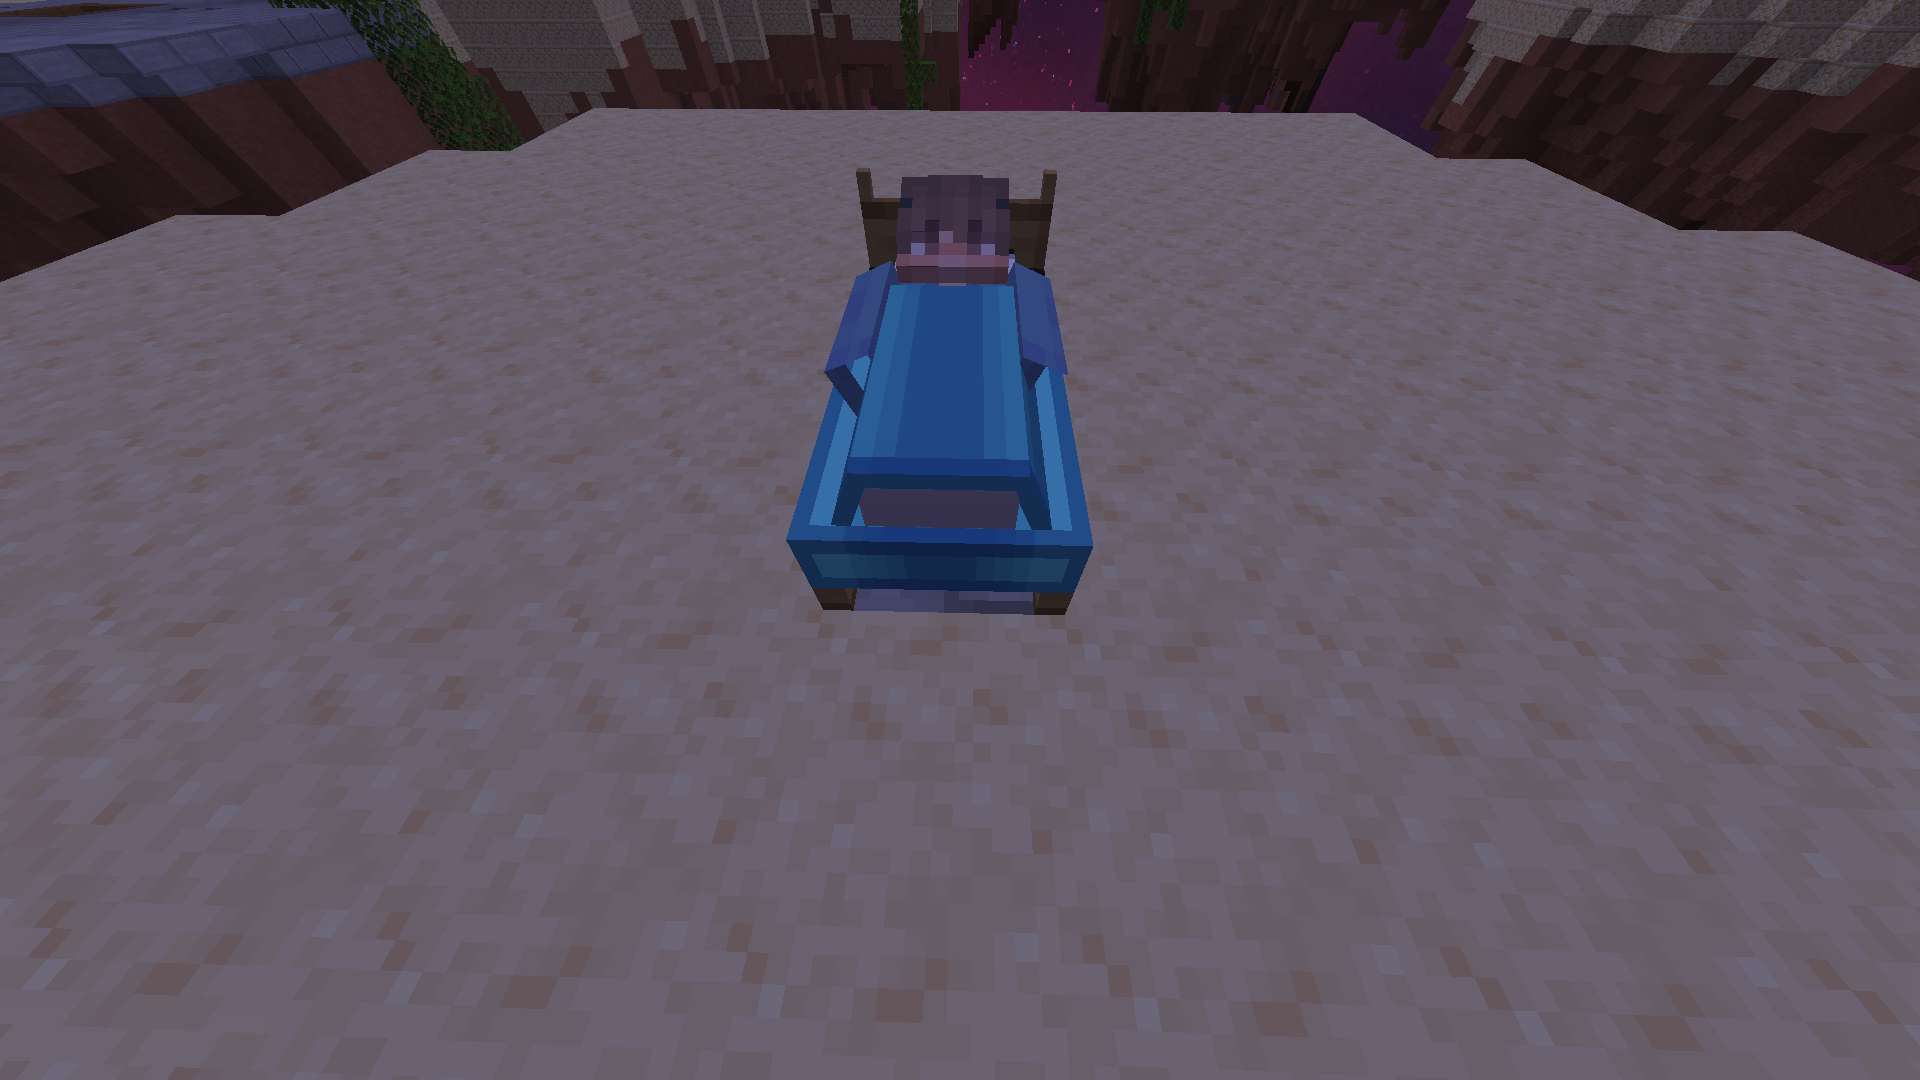 Overlay bed with SKIN  by A_Matteo 16x by A_Matteo on PvPRP